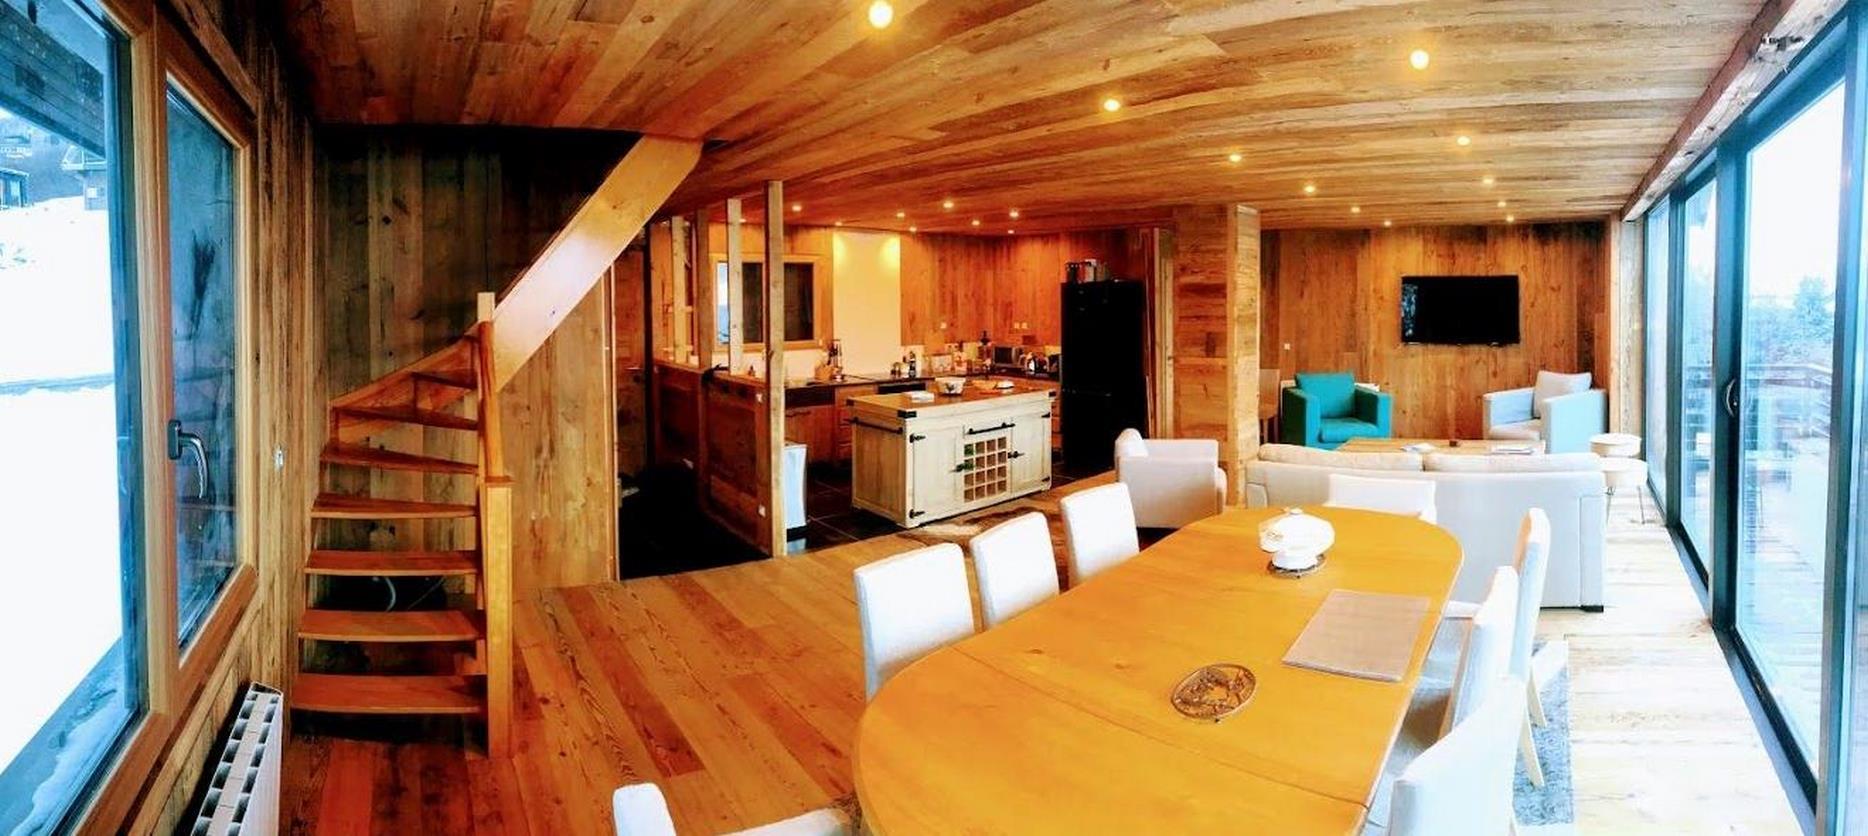 Super Besse chalet rental - old wood in the living room of the chalet